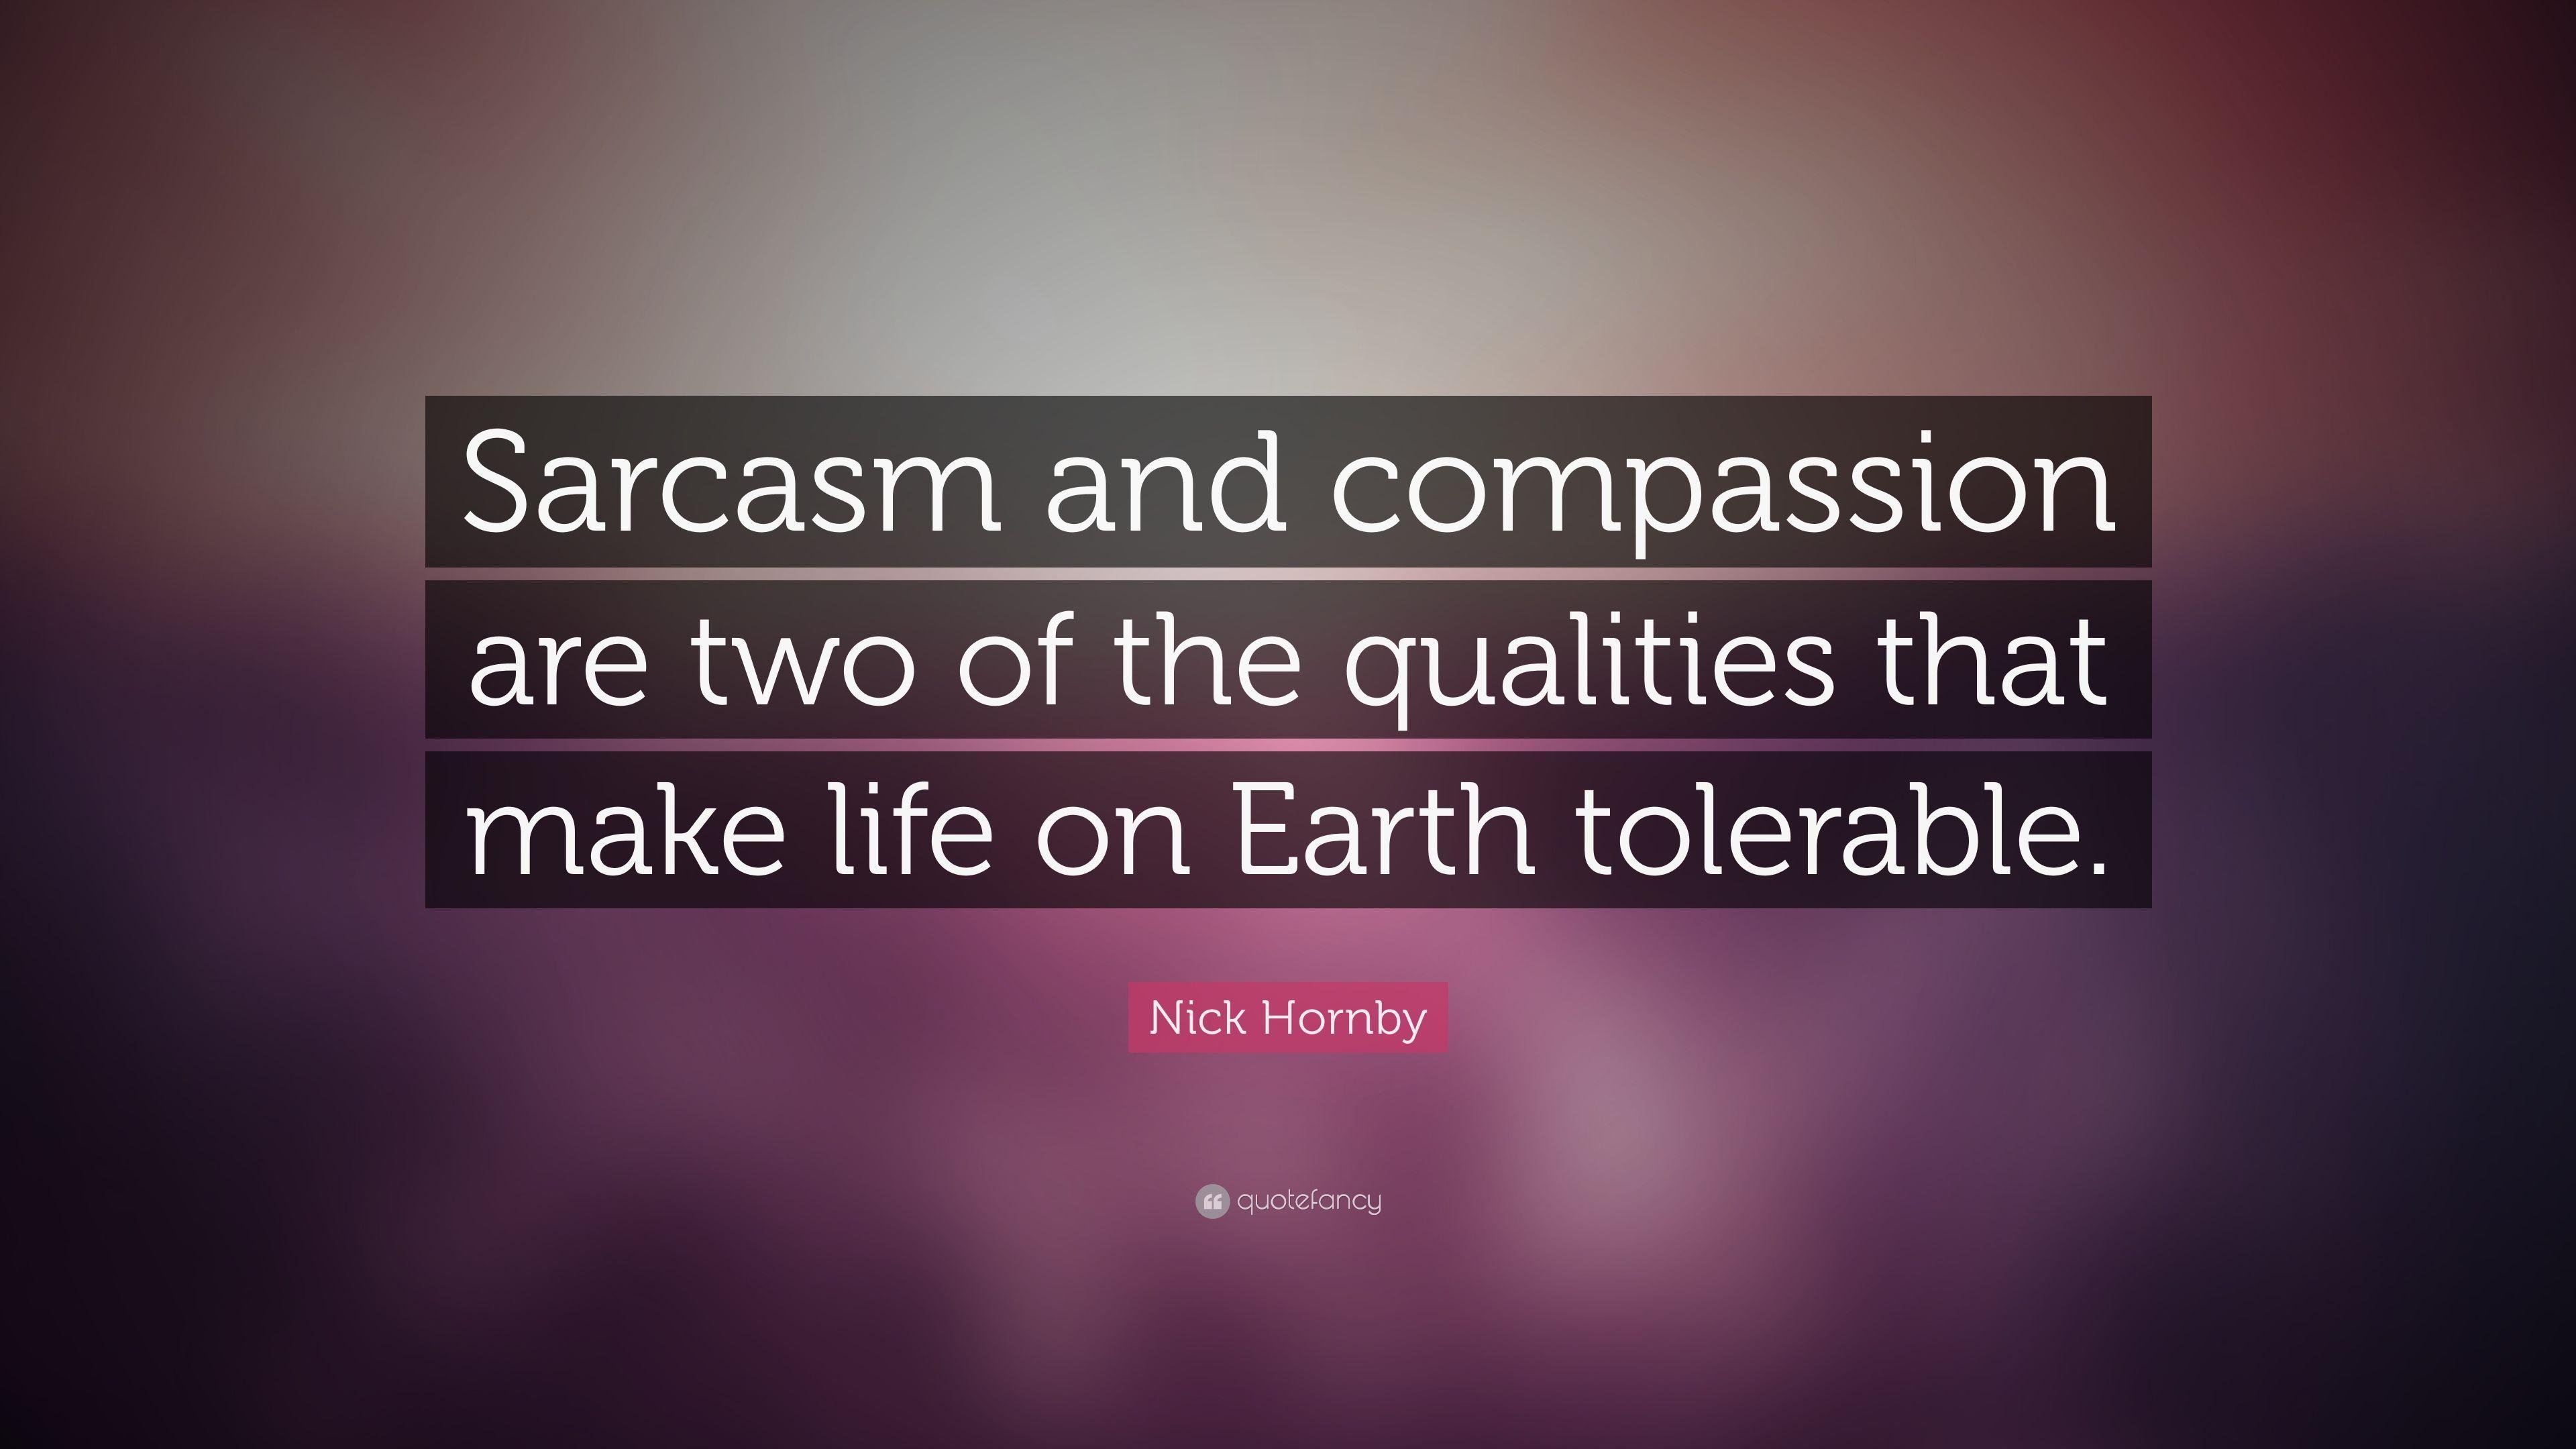 Nick Hornby Quote: “Sarcasm and compassion are two